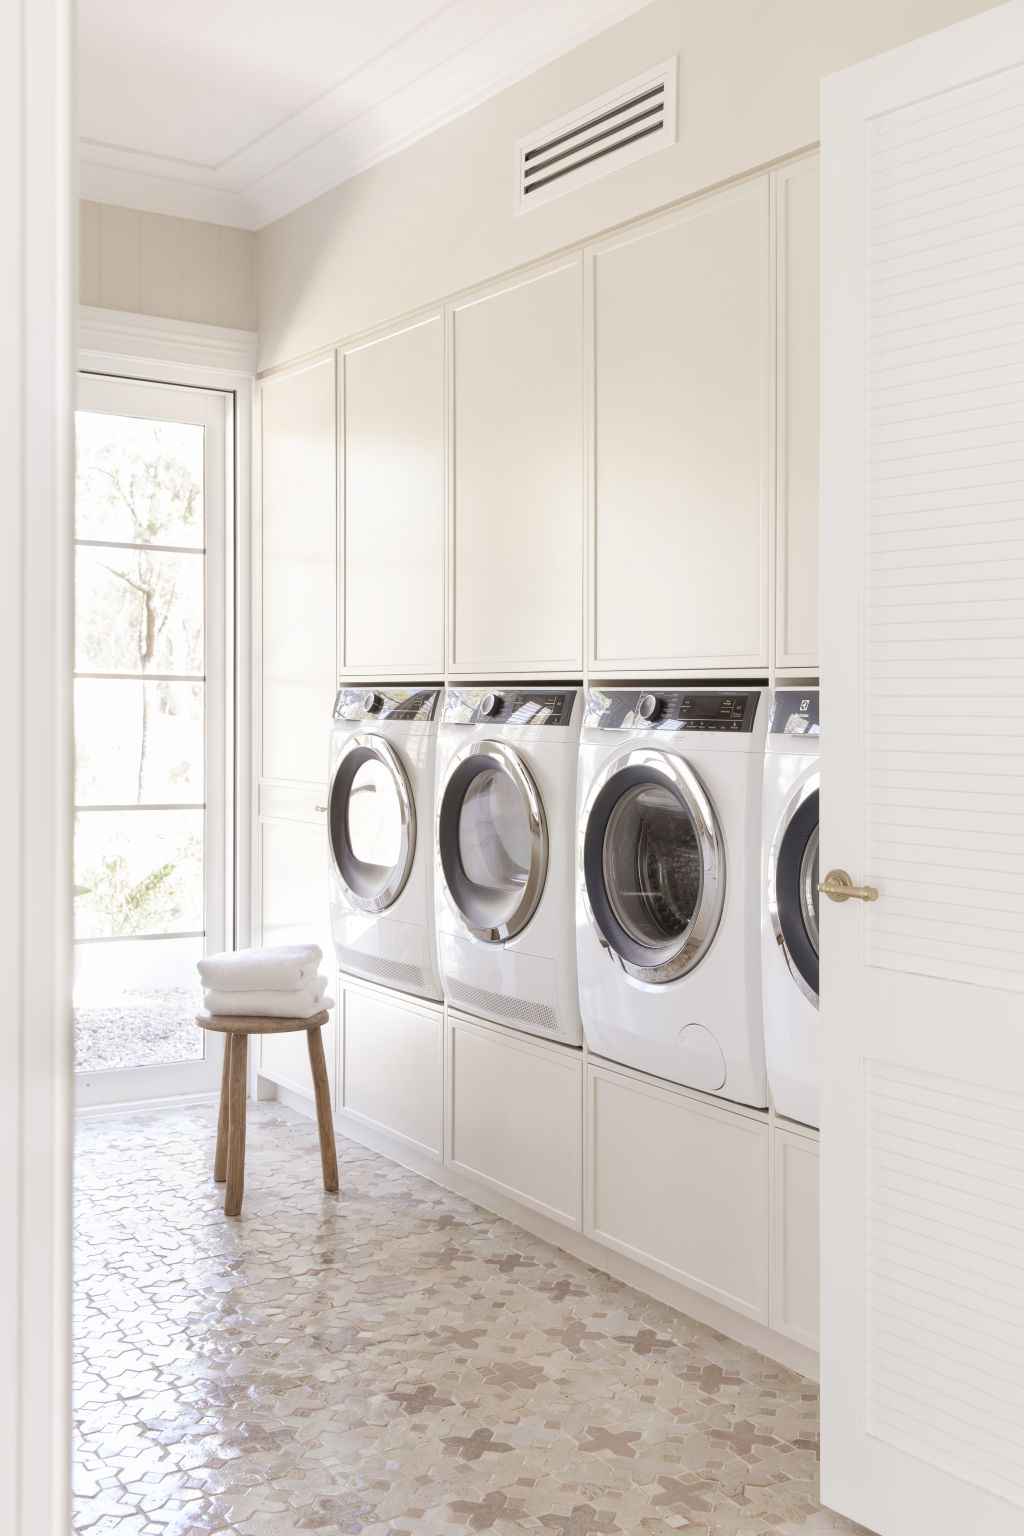 The laundry in House 13 is as functional as it is beautiful. Photo: Jacqui Turk